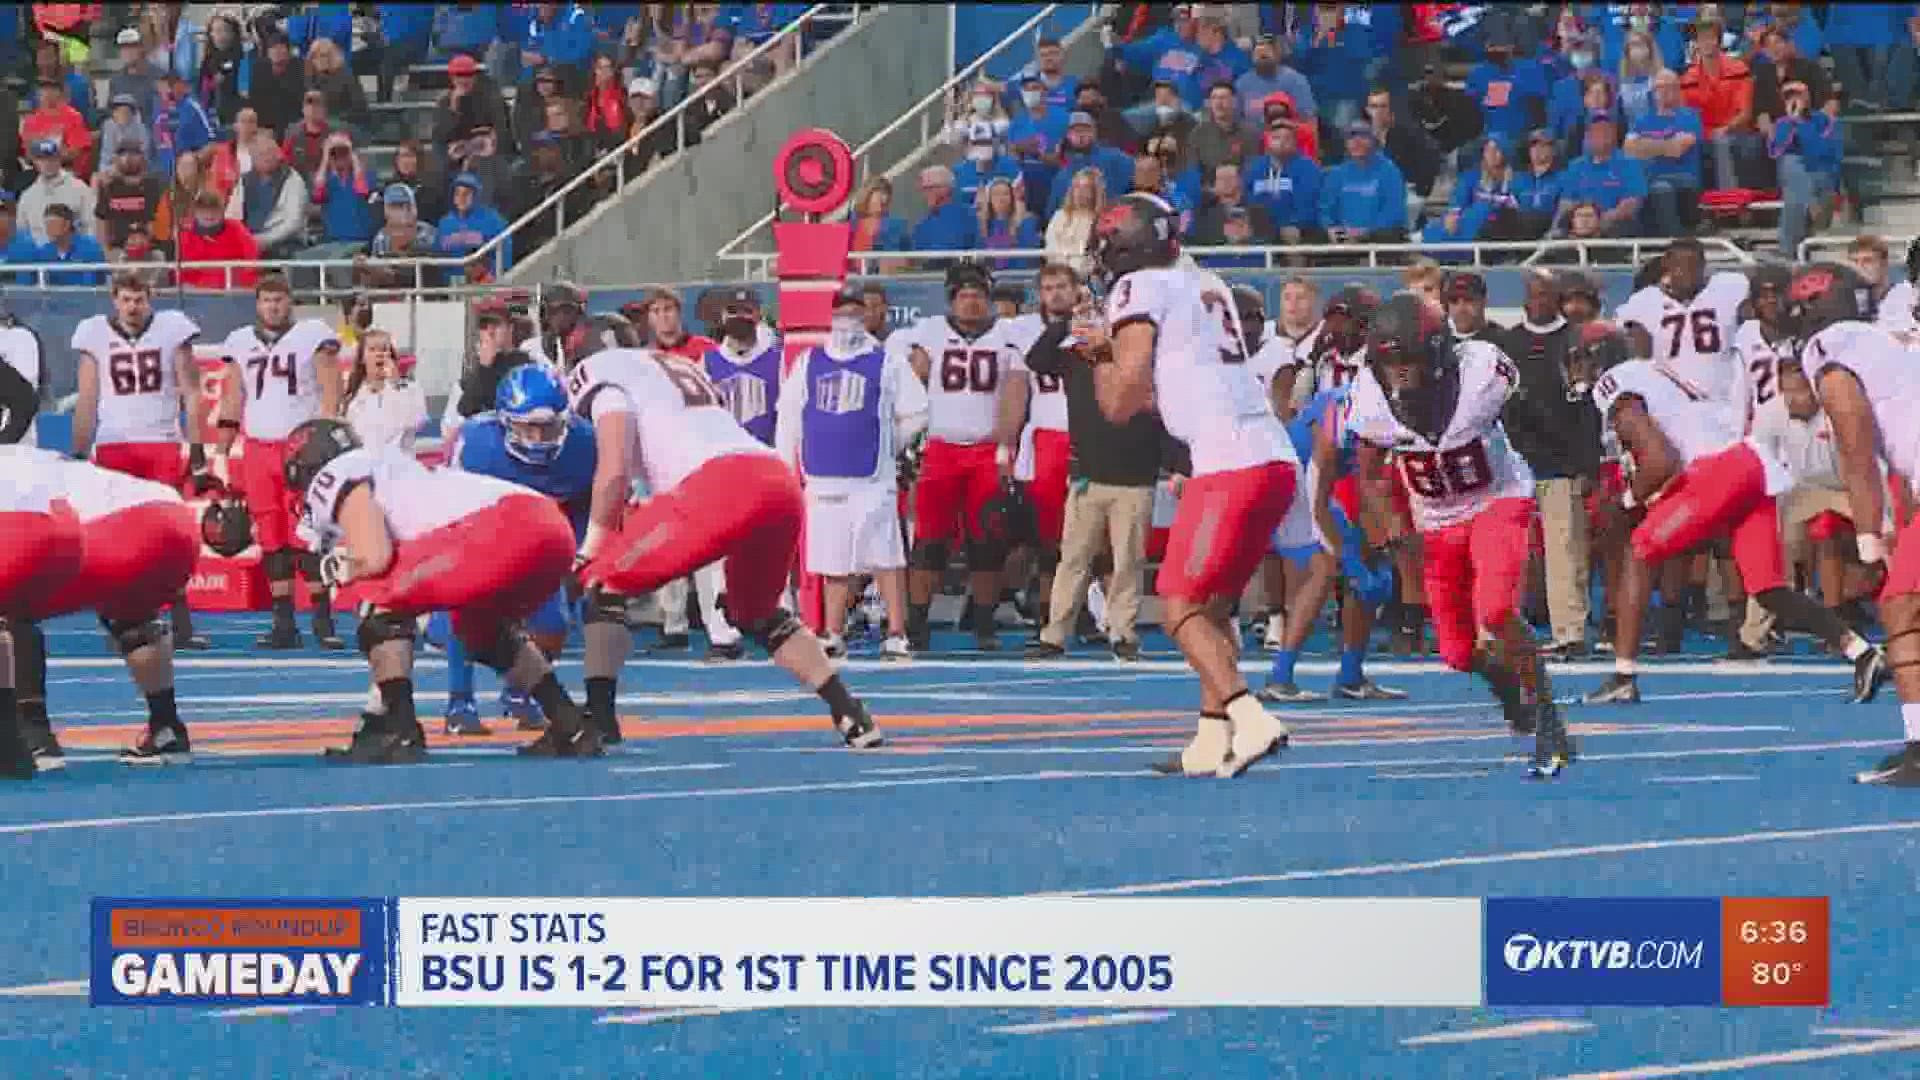 Through three games, the Boise State Broncos have struggled running the ball and stopping the run on defense.